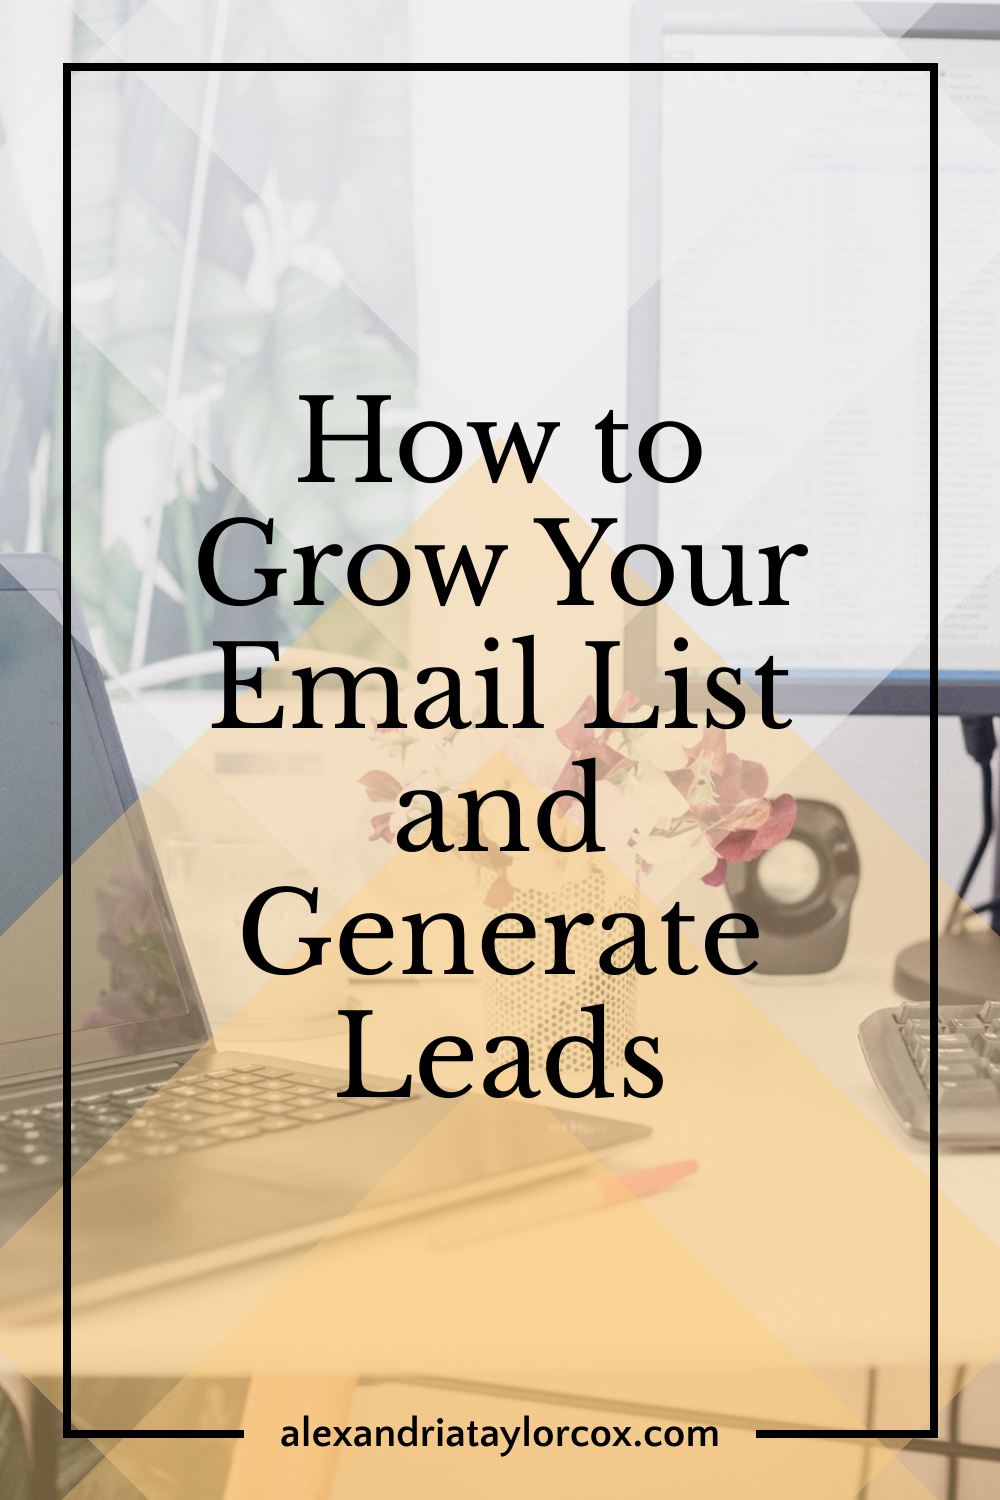 How to Grow Your Email List and Generate Leads